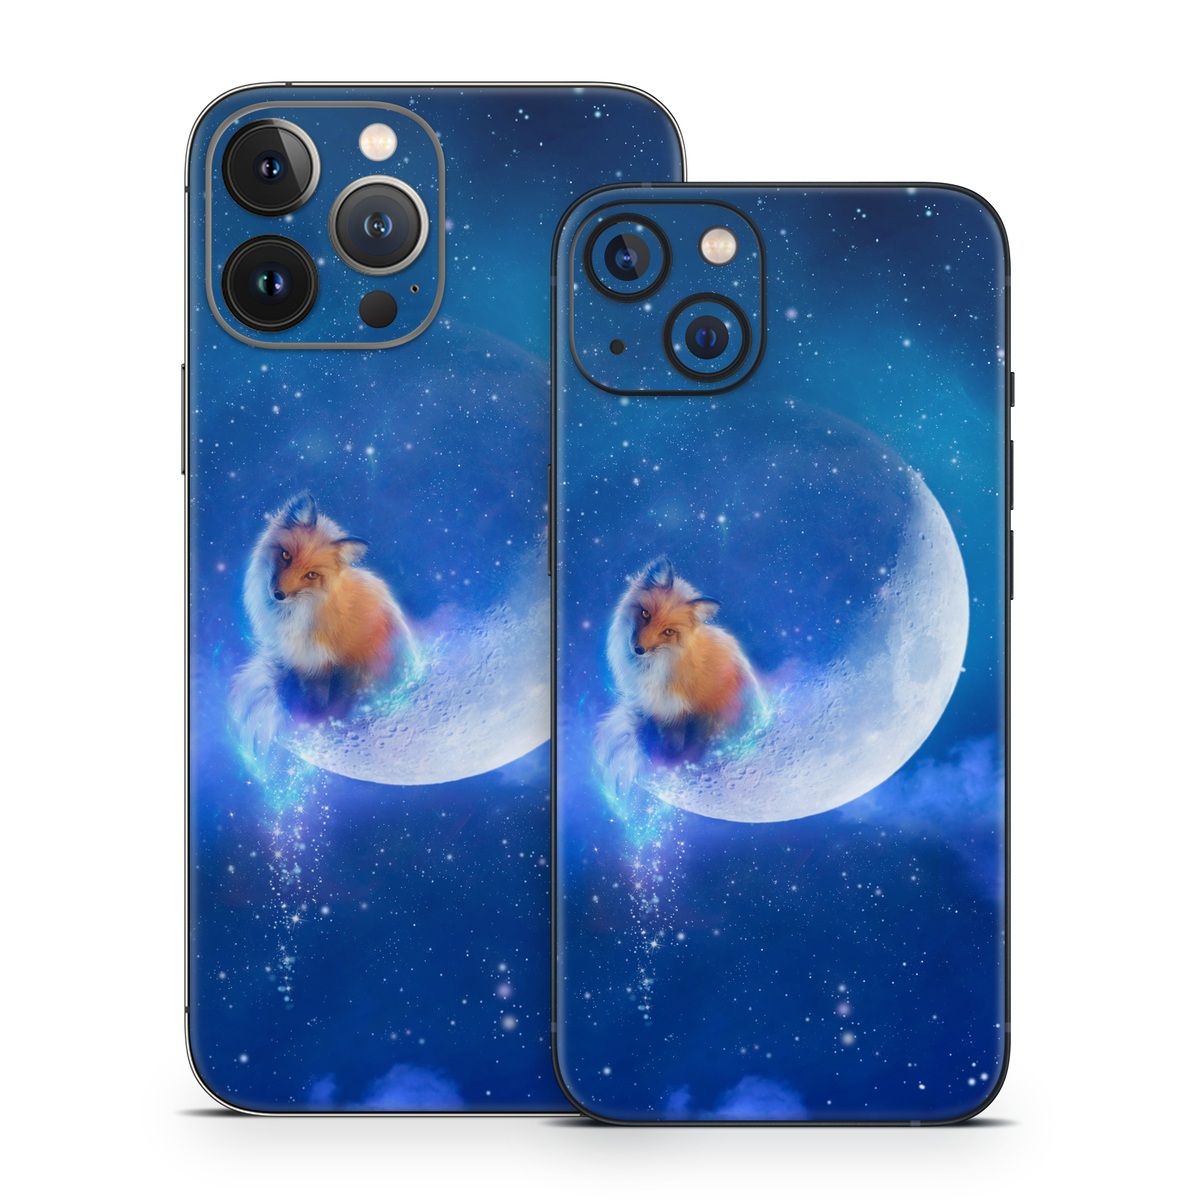 iPhone 13 Series Skin design of Sky, Atmosphere, Astronomical object, Outer space, Space, Universe, Illustration, Nebula, Galaxy, Fictional character, with blue, black, gray colors